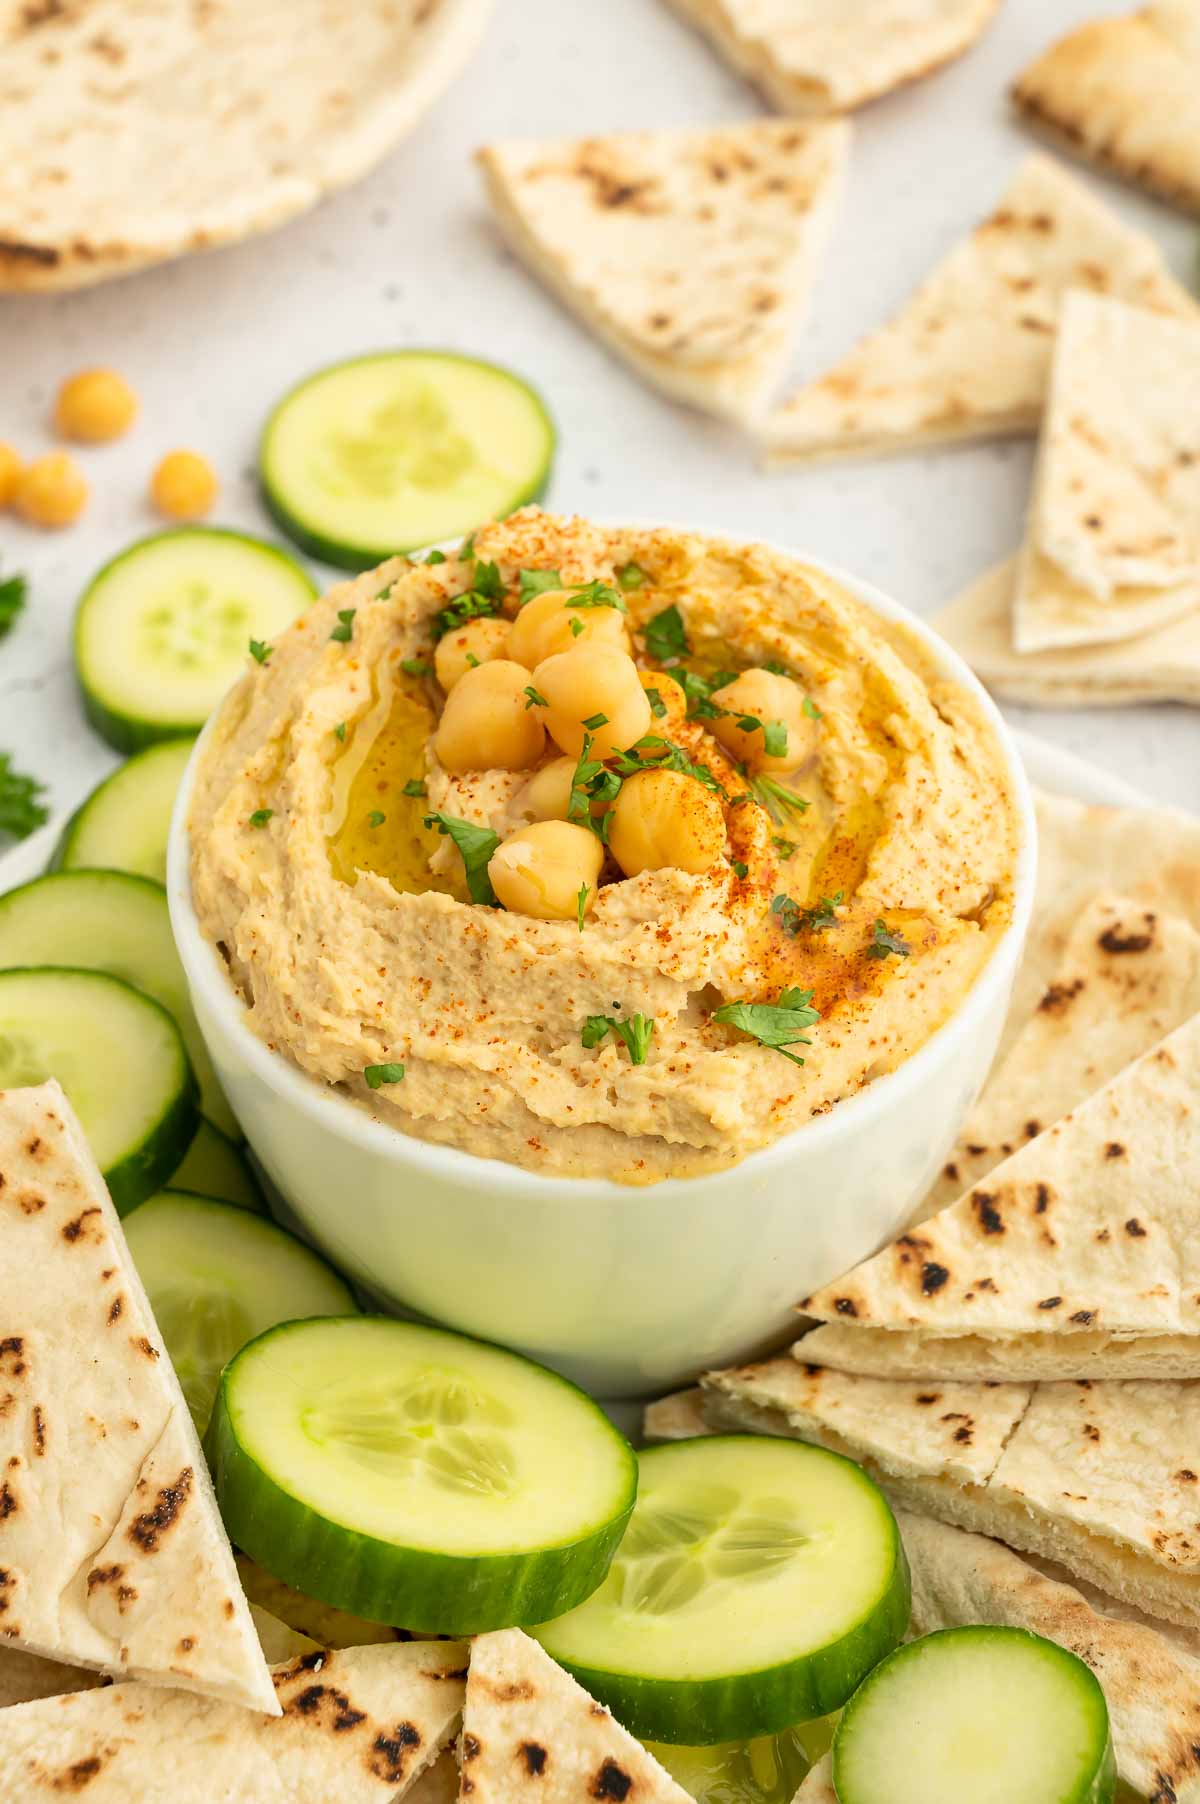 A bowl of hummus with cucumbers and pita.